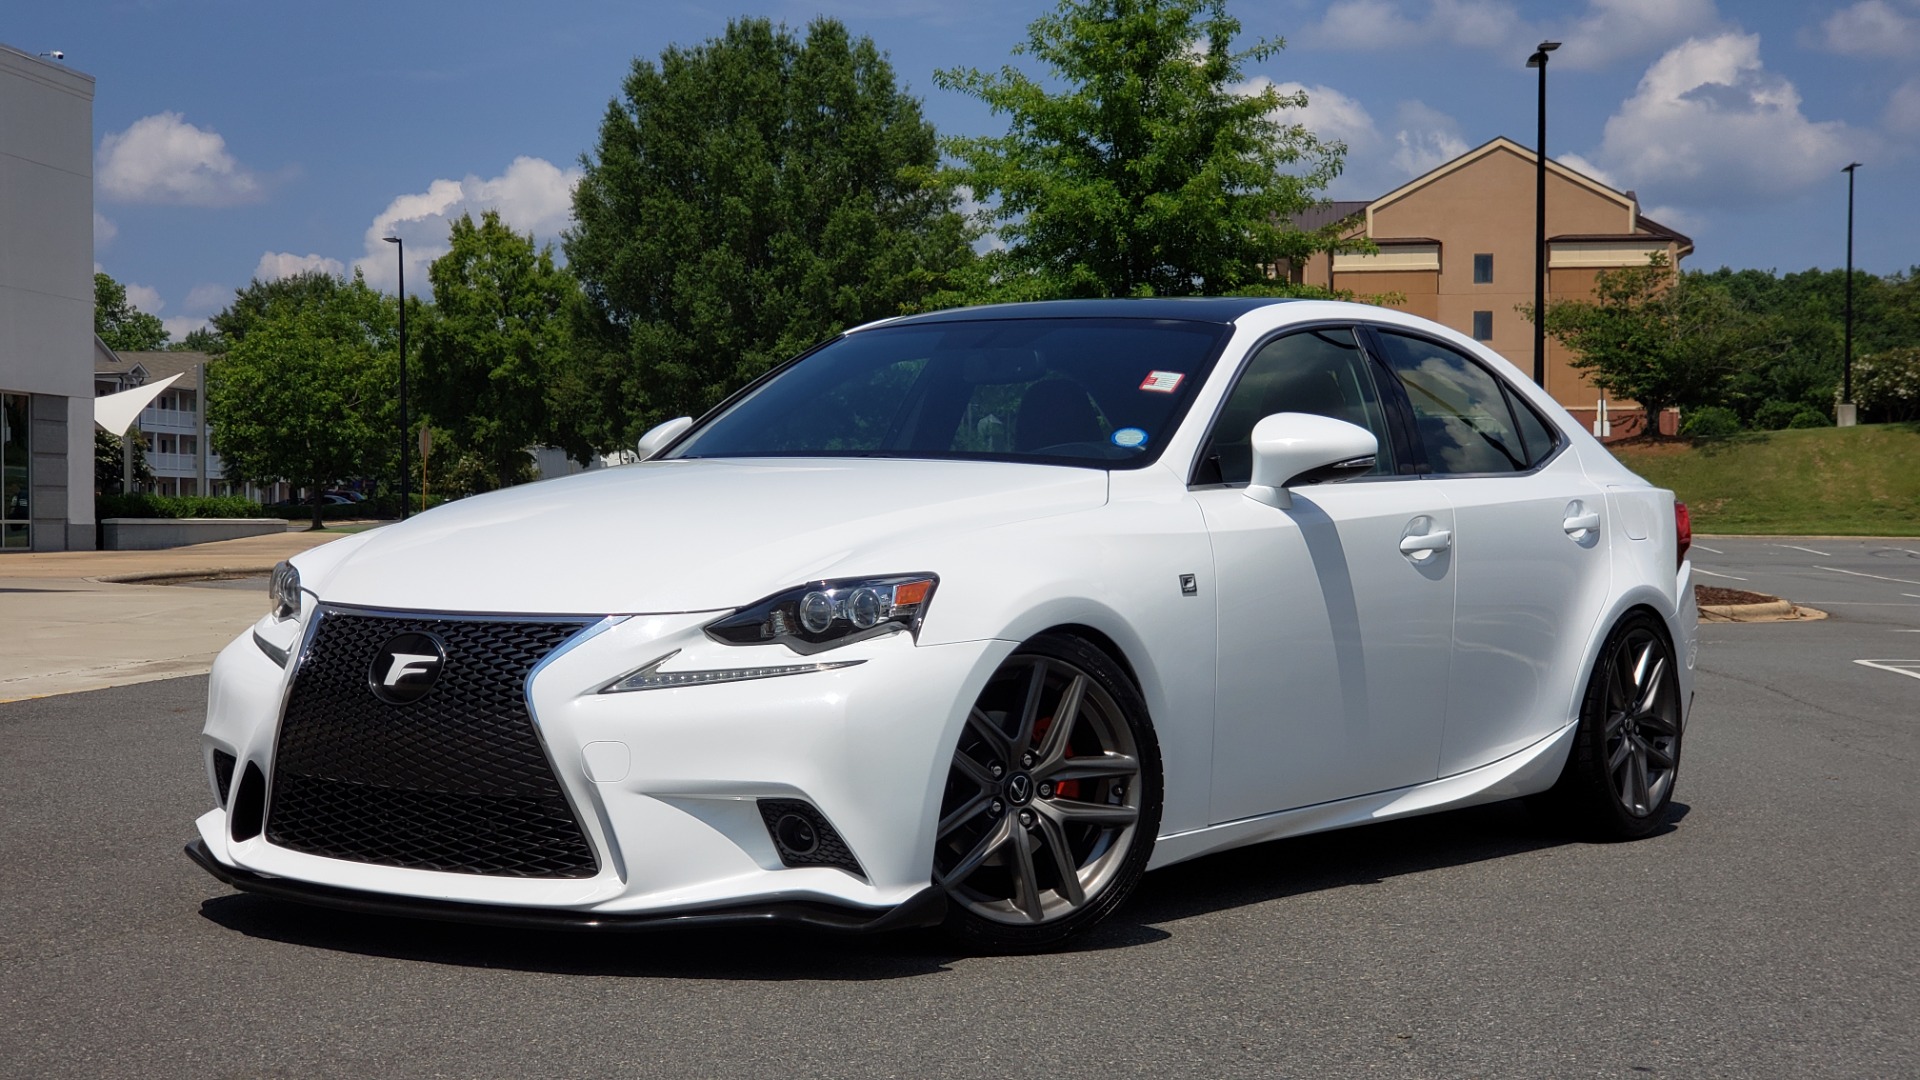 Used 2014 Lexus IS 250 F-SPORT SEDAN / BLIND SPOT MONITOR / REARVIEW / 18IN WHEELS for sale Sold at Formula Imports in Charlotte NC 28227 1